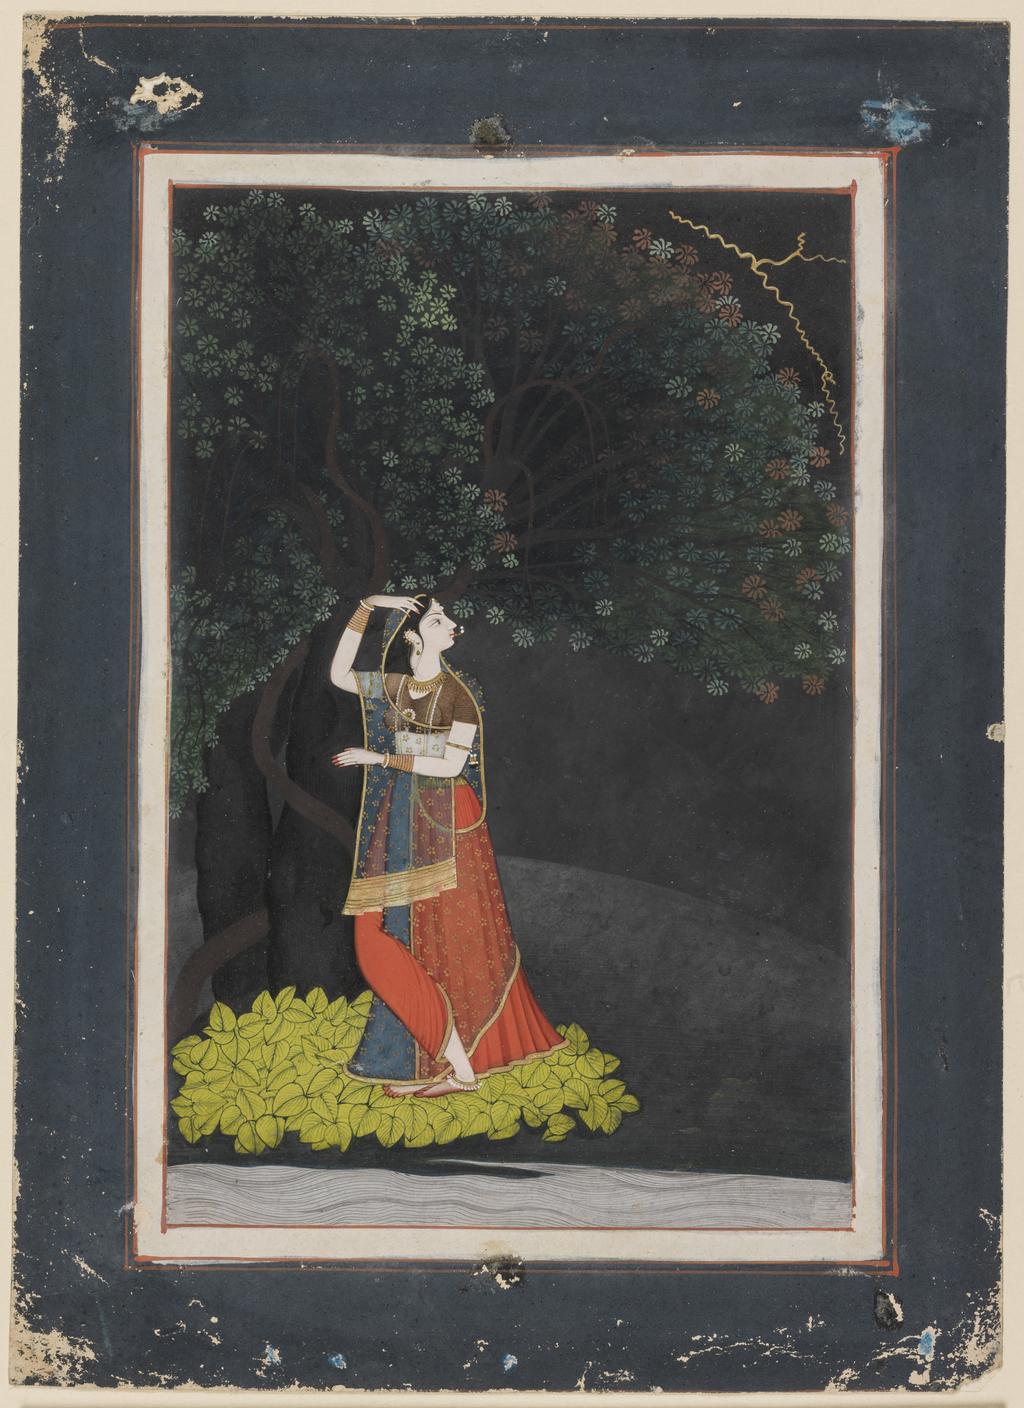 An image of Miniature. A lady (Radha) waiting for her lover, standing upon a bed of leaves, under a tree on night of storm. Unknown miniaturist. Watercolour, bodycolour including white, pen and ink with gold on paper, height 211 mm, width 139 mm, circa 1790. Pahari. Acquisition Credit: Bequeathed by P.C. Manuk and Miss G.M. Coles in 1946 through the National Art Collections Fund.